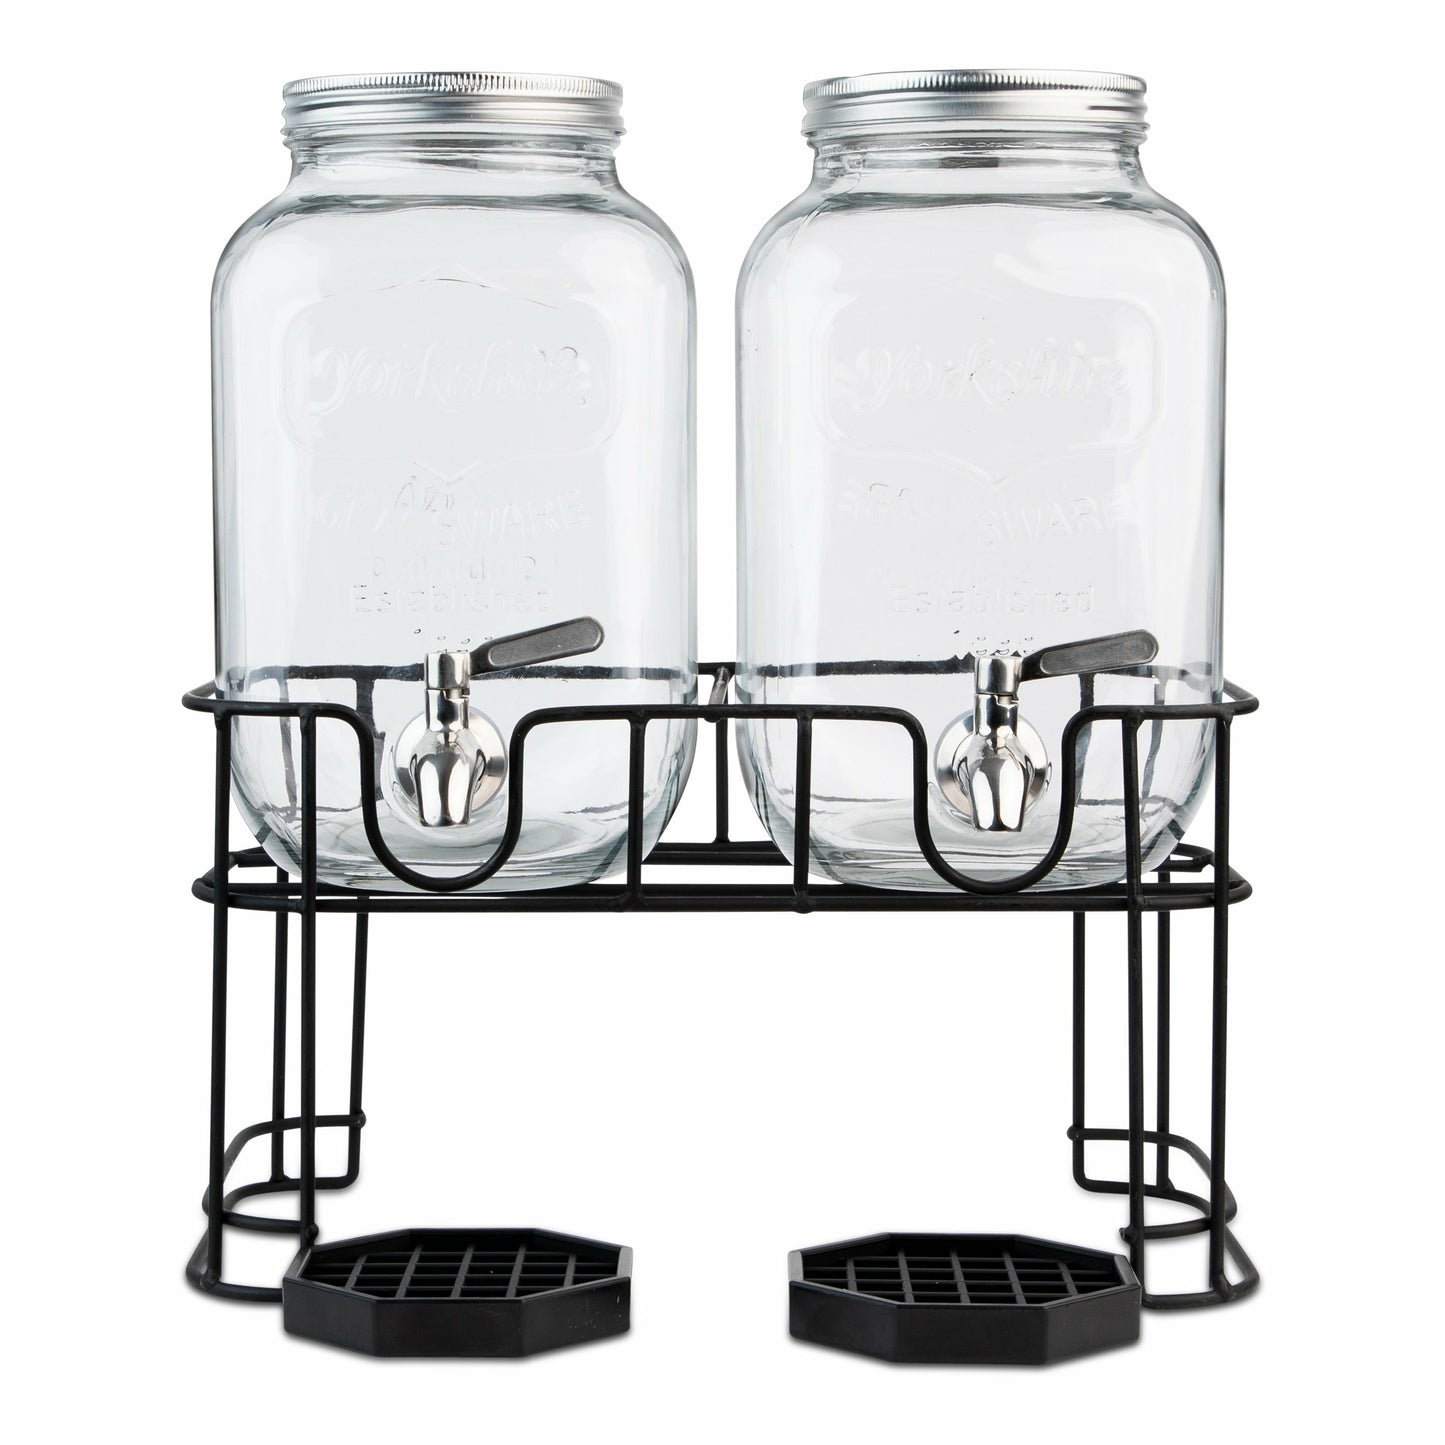 Dual Gallon Dispensers with Stand and Drip Trays